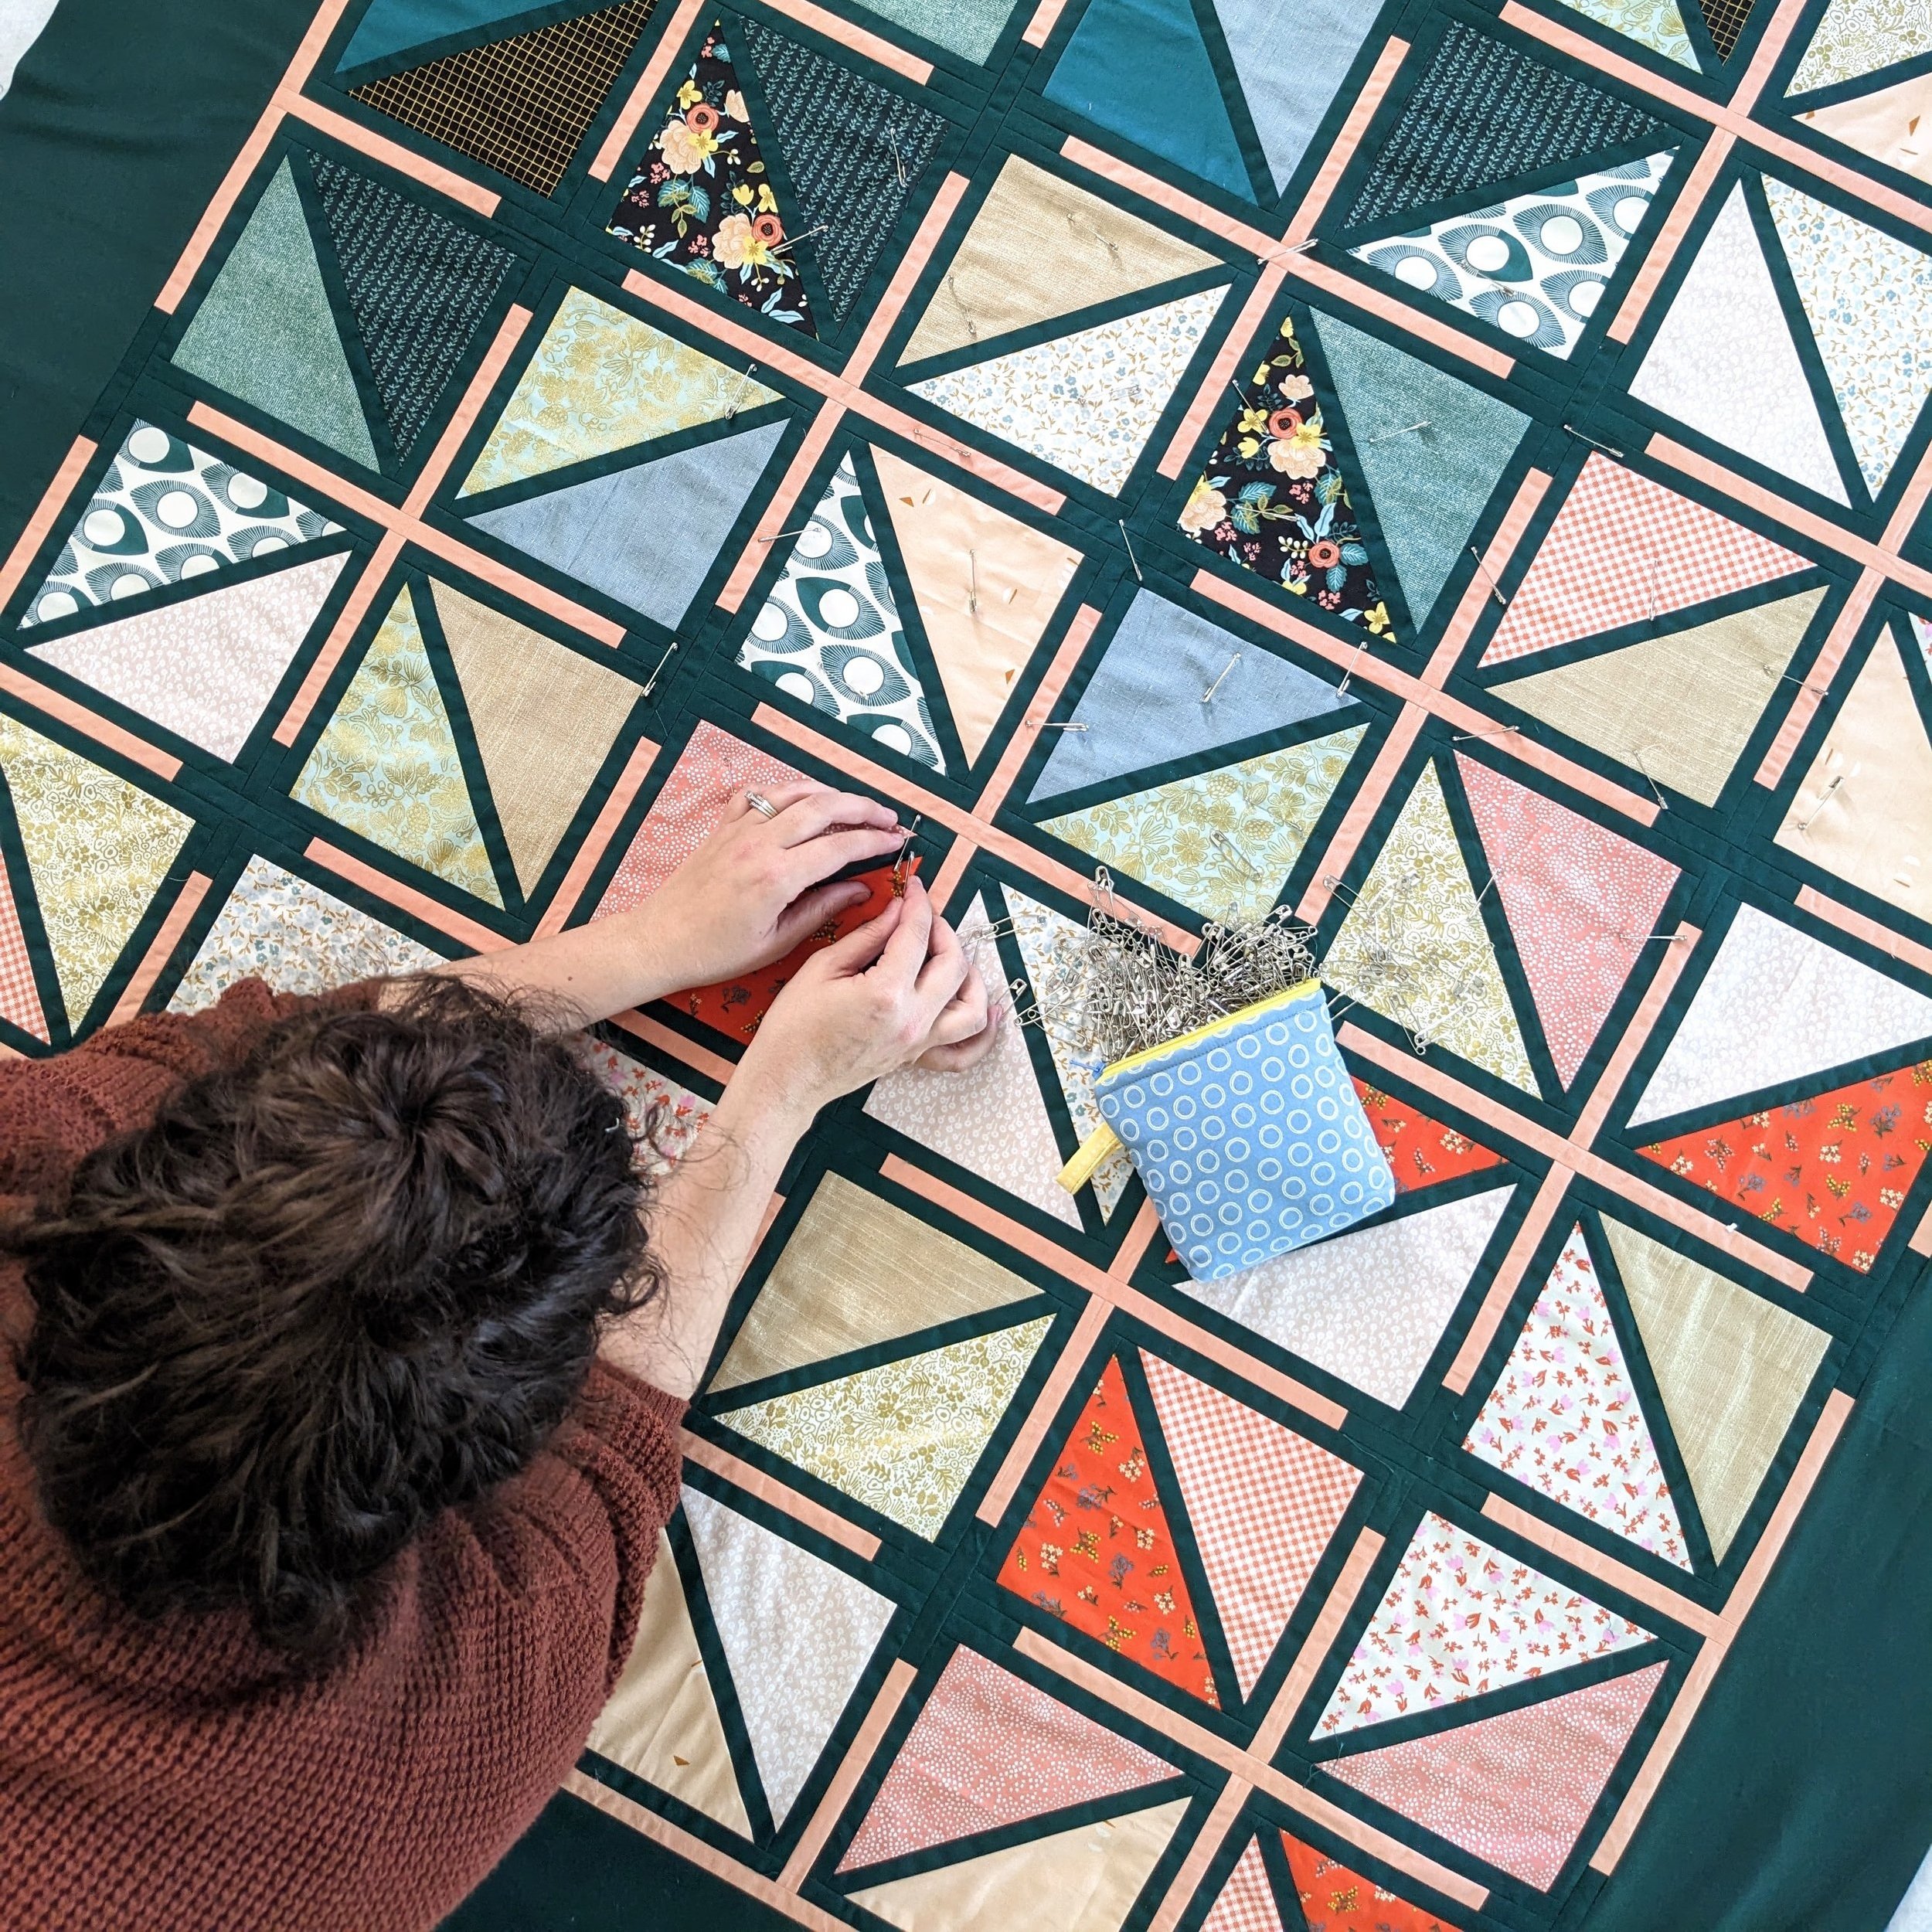 Pin Basting a Quilt with Curved Pins